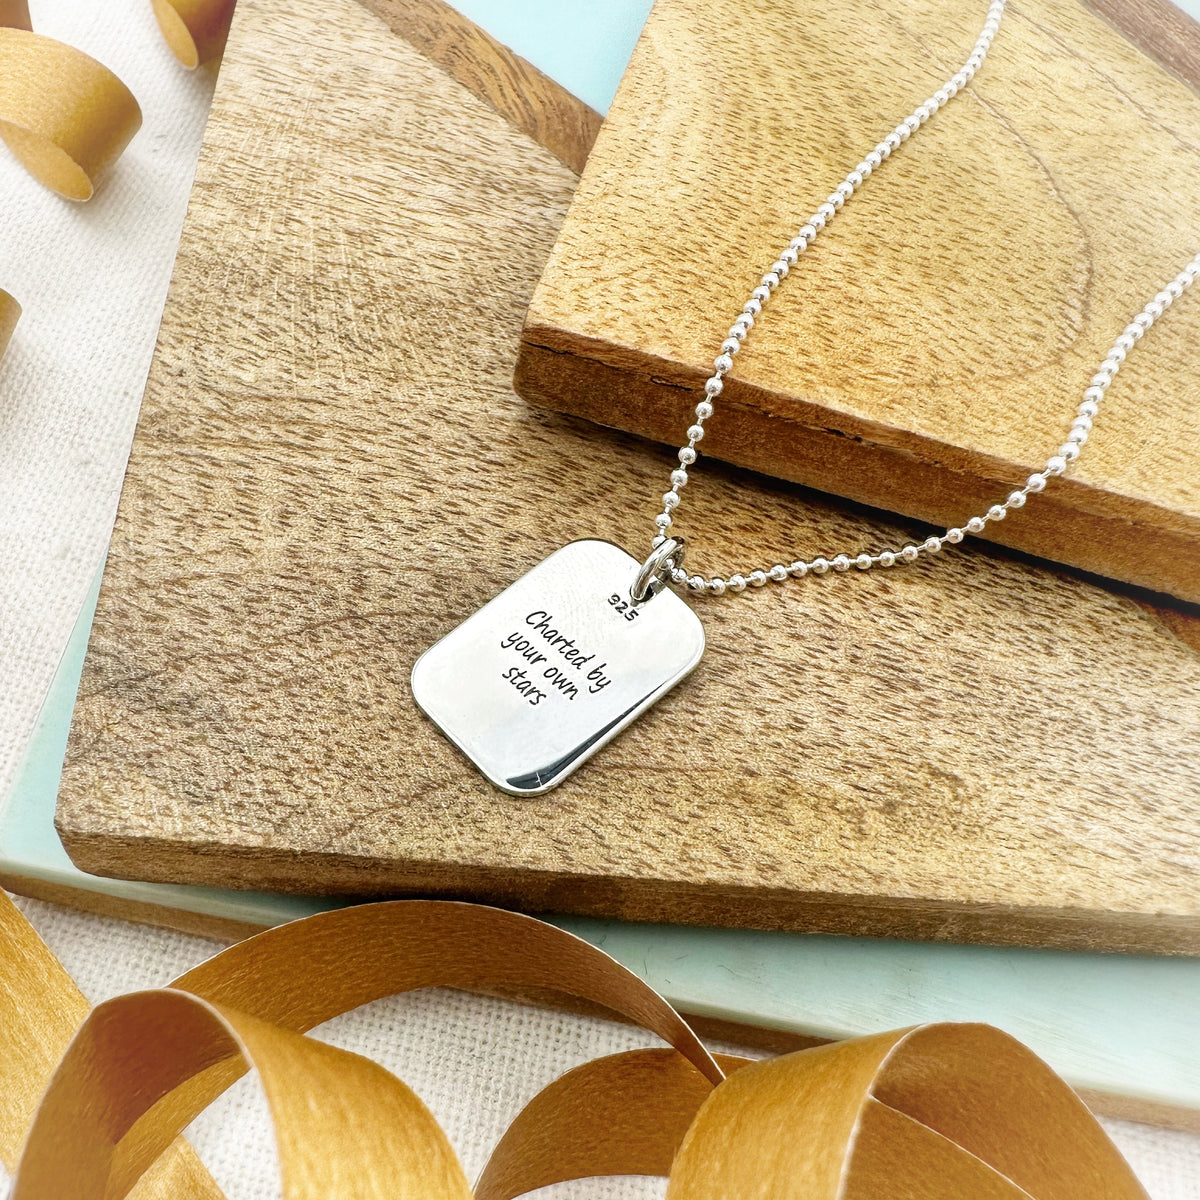 charter your own seas quote pendant